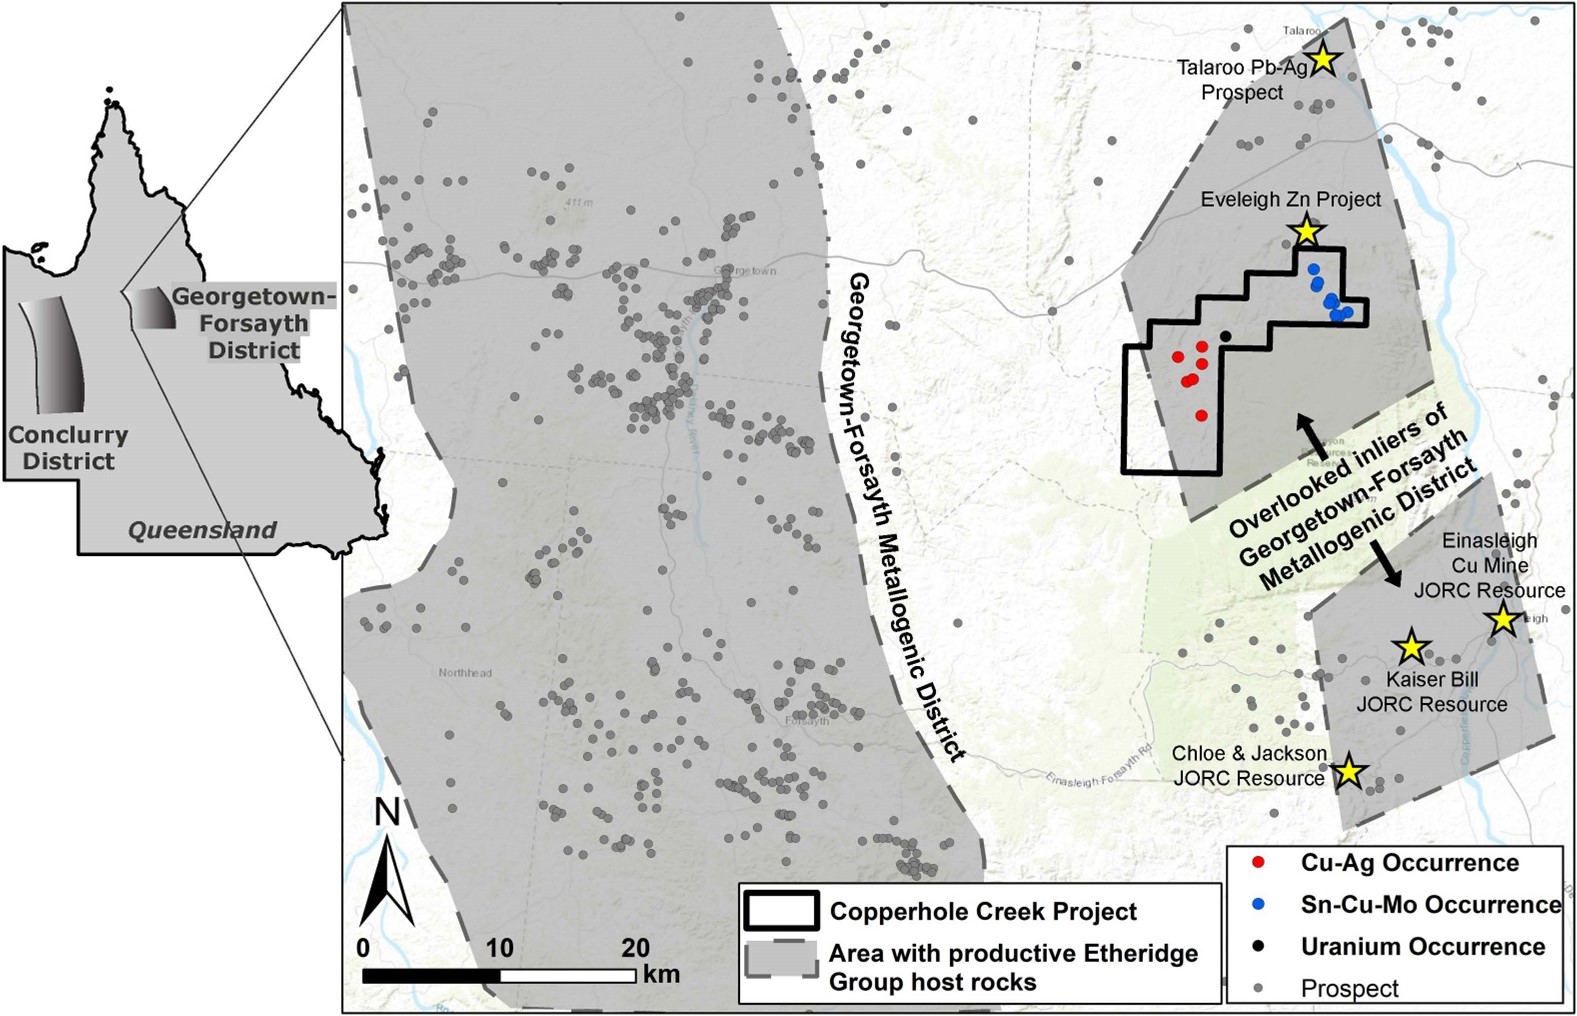 Regional map of Copperhole creek showing occurrences and nearby mines